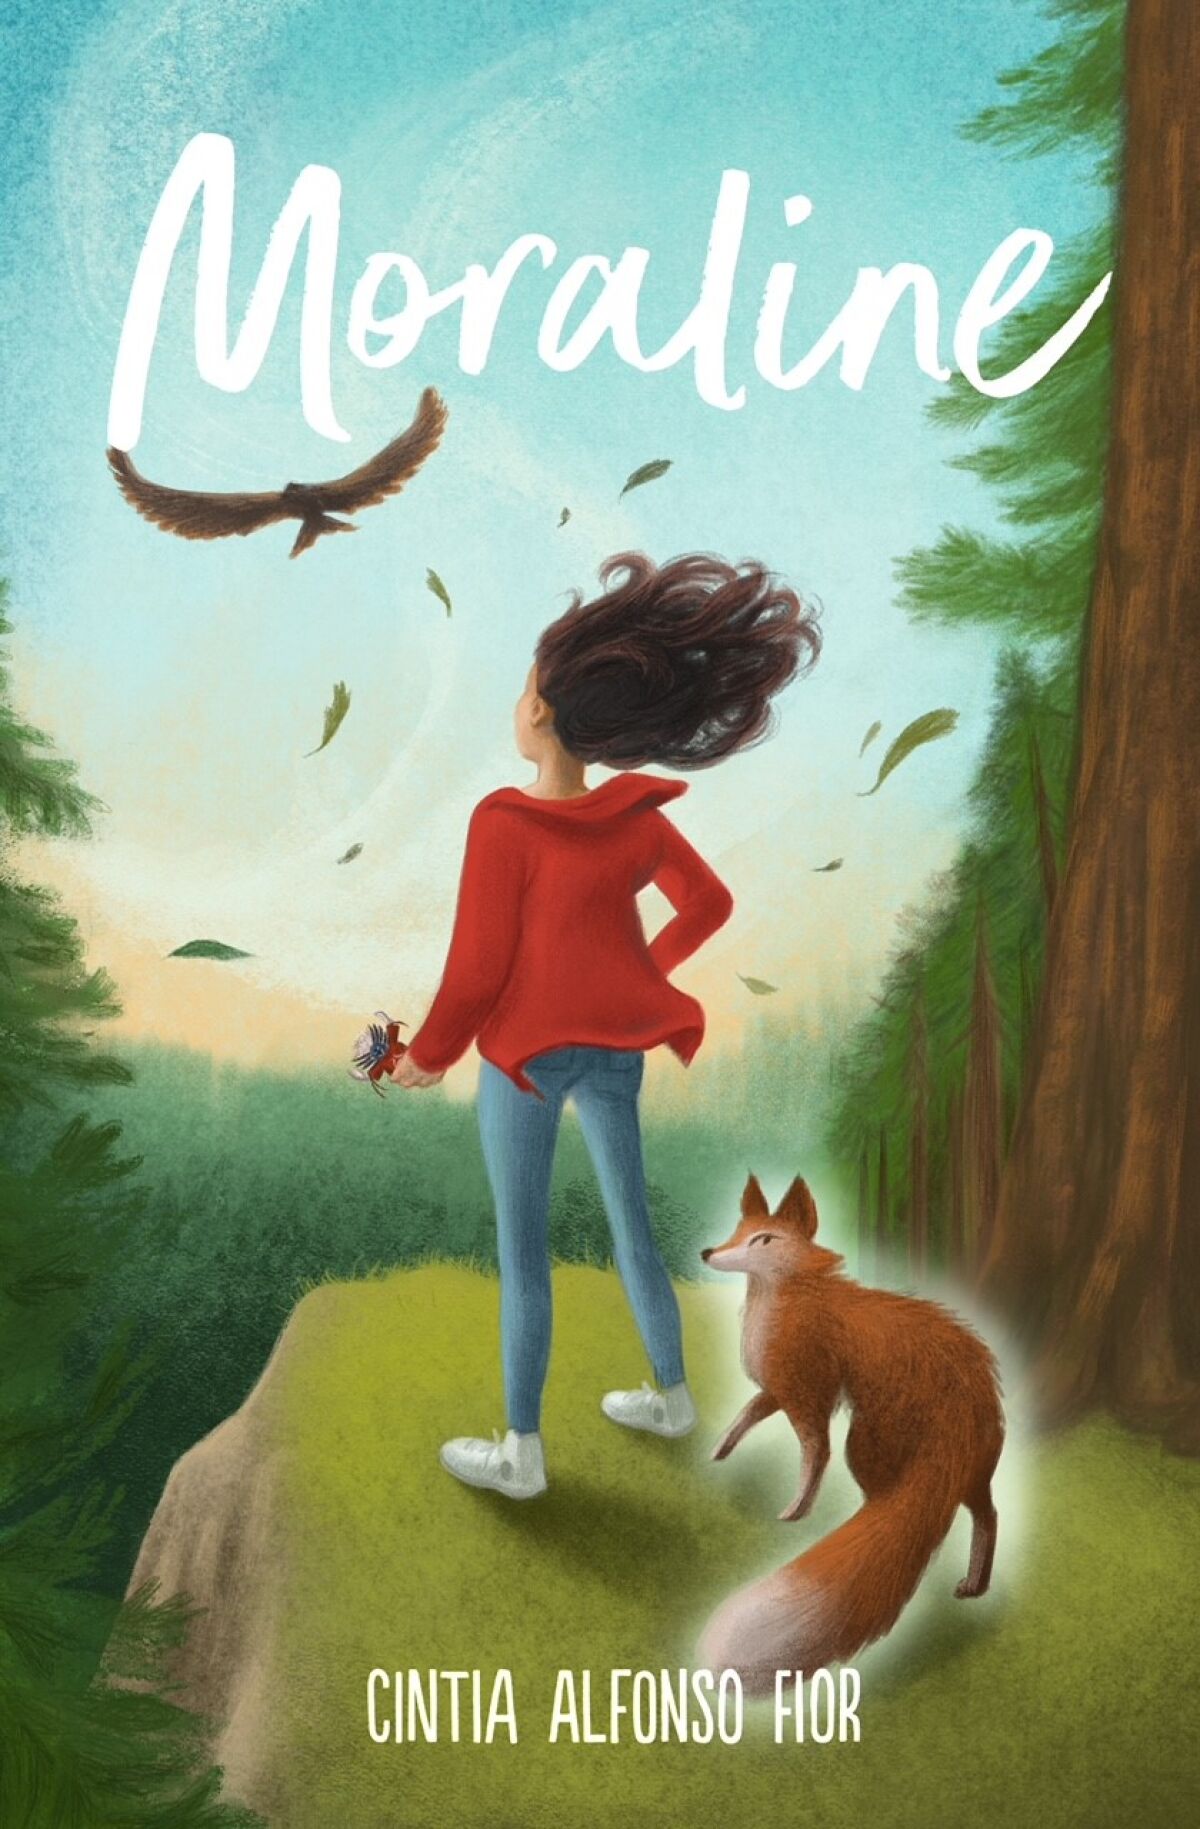 The cover of “Moraline”